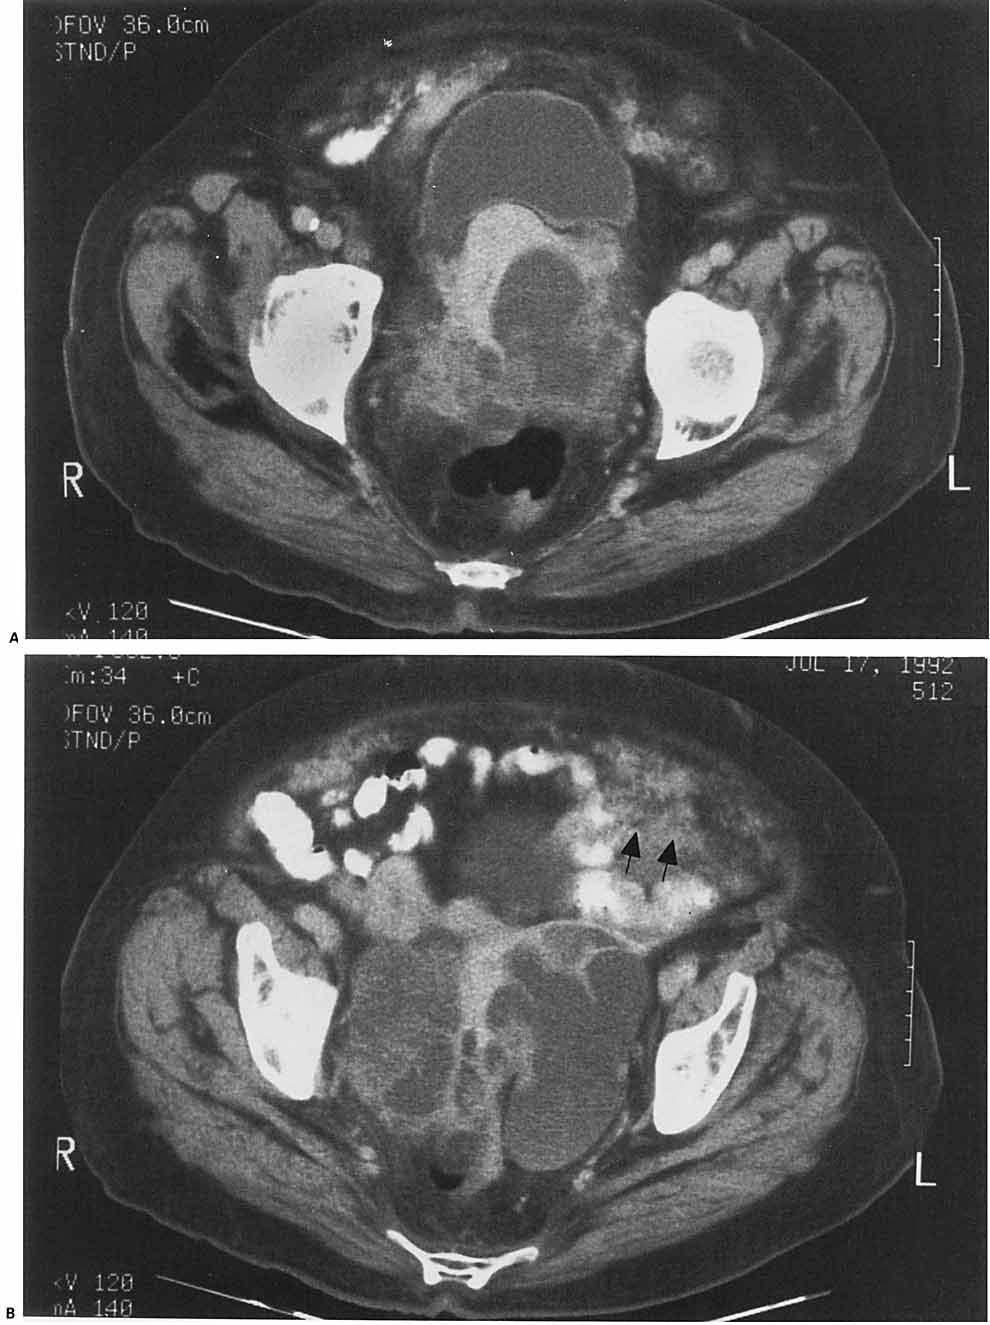 METASTATIC COLONIC ADENOCARCINOMA FIGURE 2. (A) Pelvic CT scan at level just below bladder dome revealing the inferior aspect of the mass deforming the uterus.